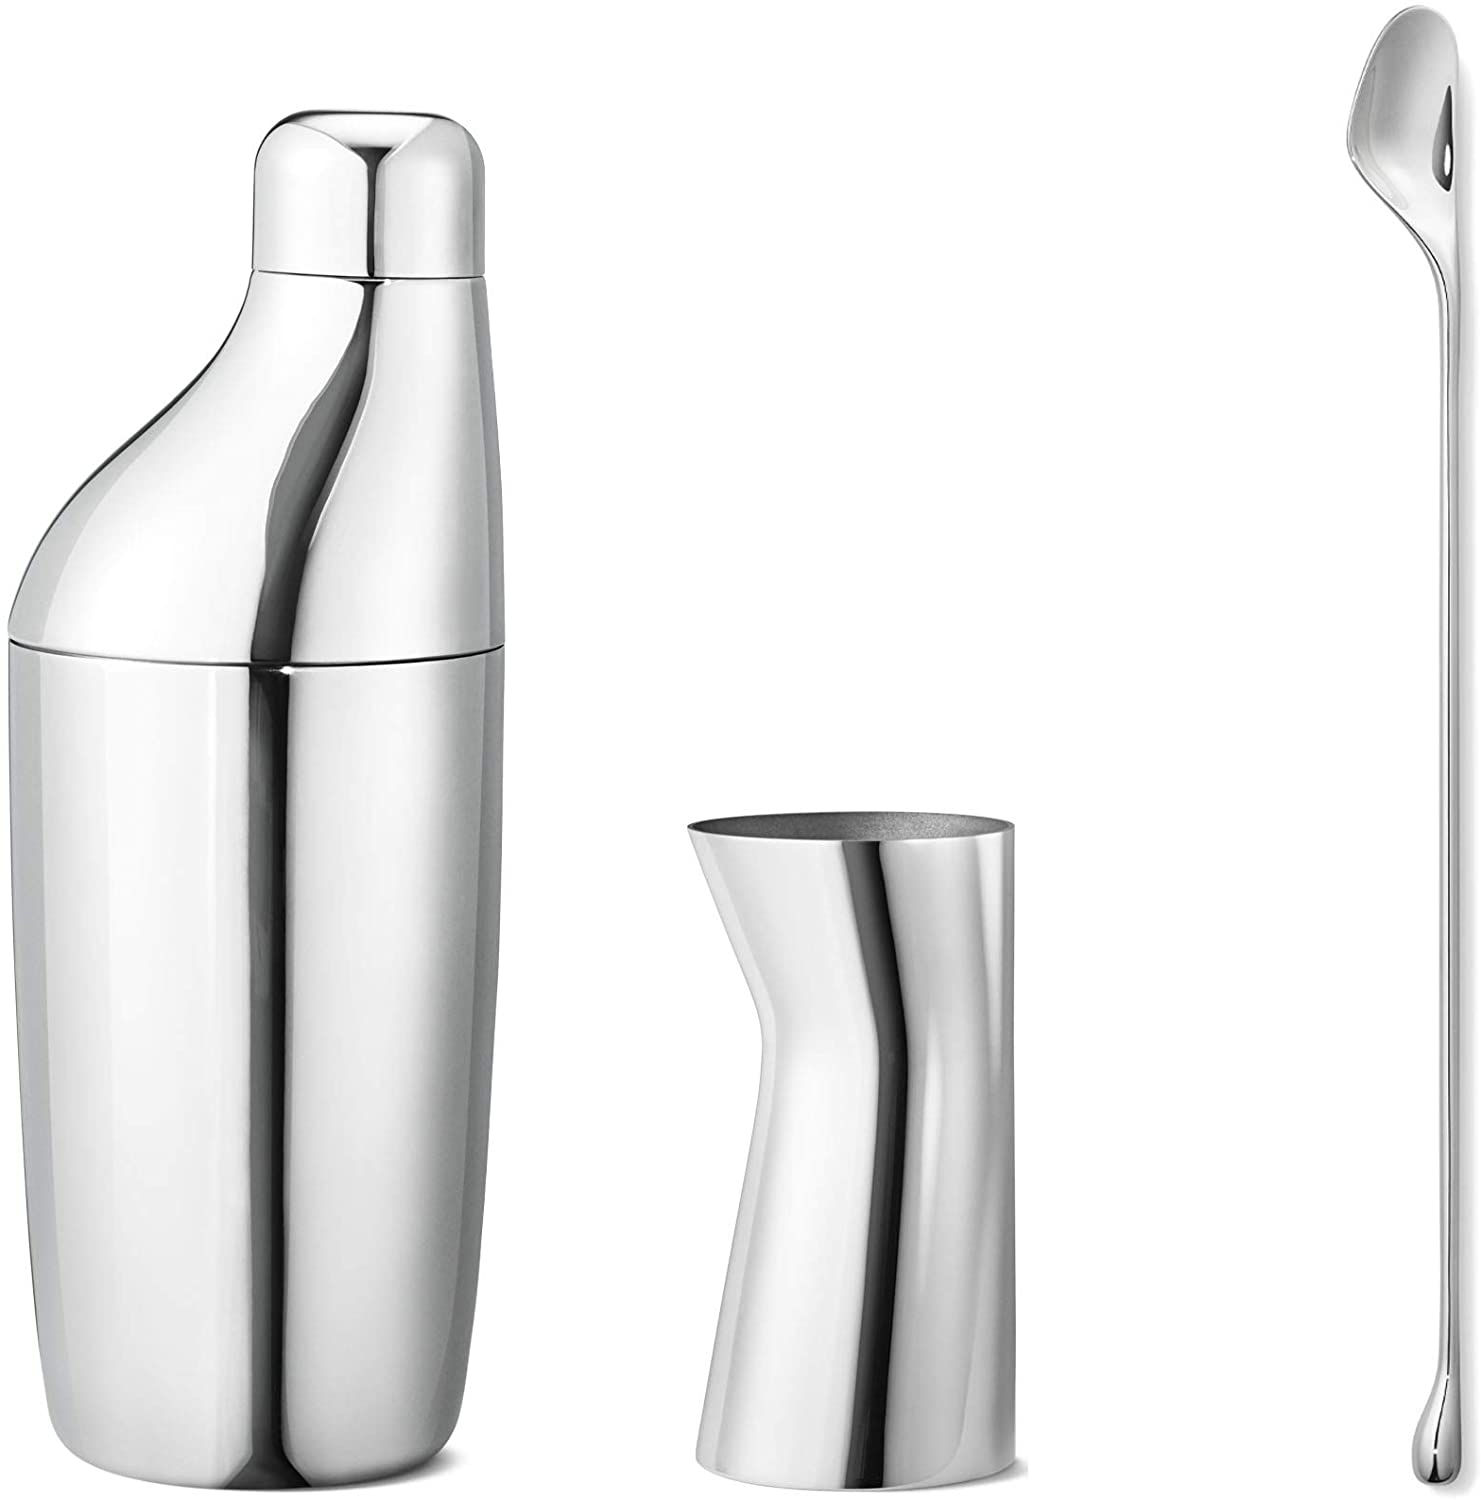 Georg Jensen Sky High Polished Stainless Steel 3 Piece Gift Set